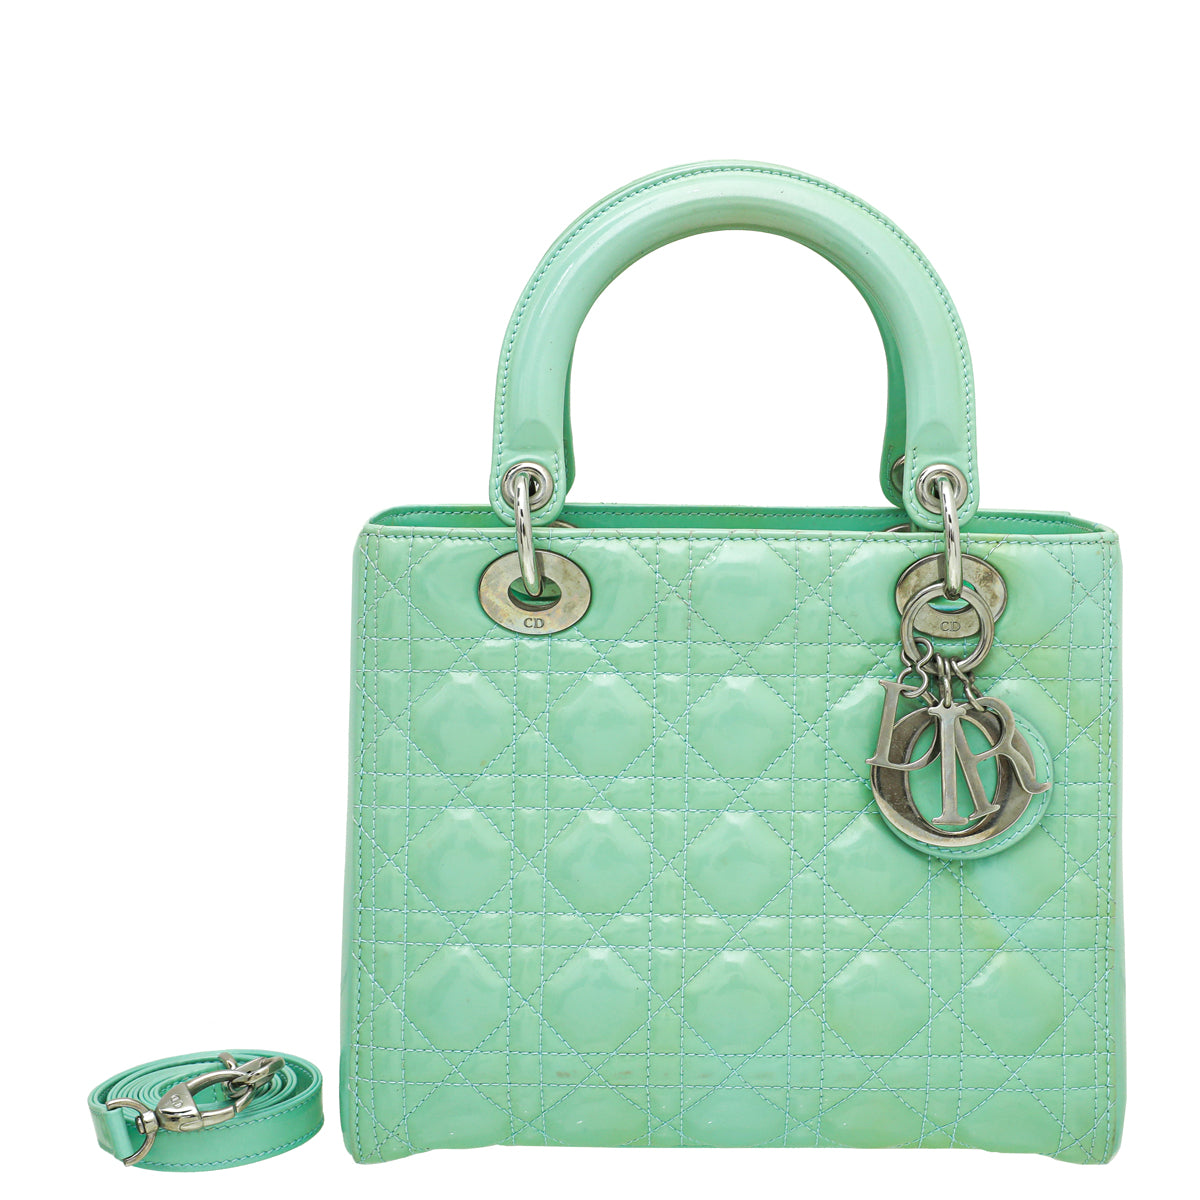 Load image into Gallery viewer, Christian Dior Mint Lady Dior Medium Bag
